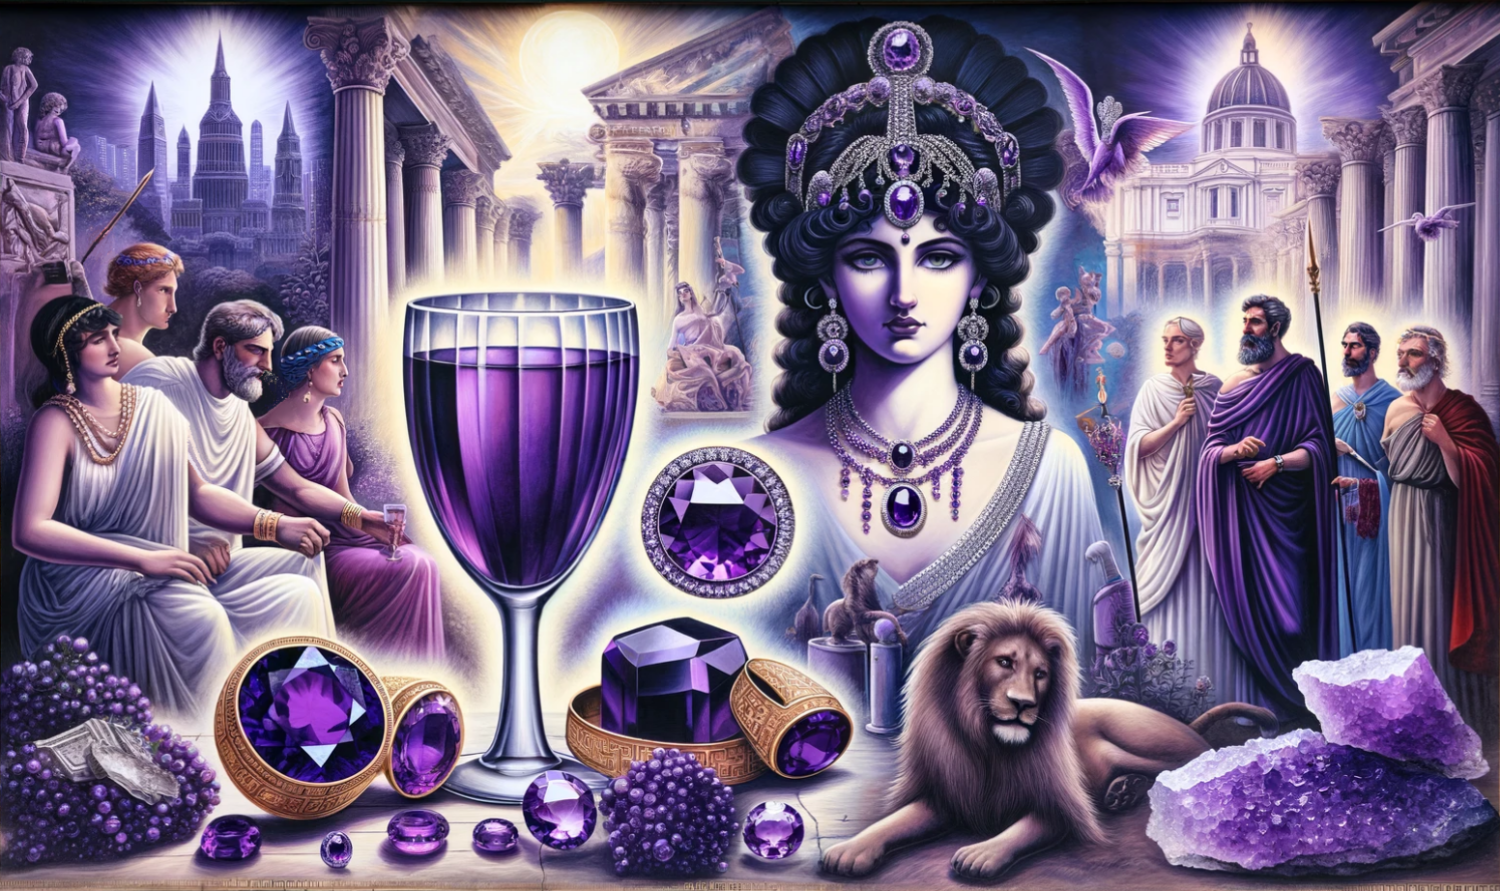 A banner-sized mural depicting the historical uses of amethyst stones. On the left, ancient Greek scenes with individuals wearing amethyst jewelry, and wine goblets made of amethyst to signify protection from drunkenness. In the center, Roman matrons wearing amethyst necklaces to symbolize fidelity, and an elegant portrayal of Cleopatra adorned with amethyst as a symbol of enlightenment and love. On the right, Christian bishops with amethyst rings representing piety and celibacy, and a depiction of the stone in the British Crown Jewels, emphasizing its royal and powerful connotations. The background transitions into the Middle Ages, showing the stone as a symbol of humility, with figures using it as protection against psychic attacks and as a healing talisman against disease and infection. The color palette emphasizes the deep purple hues of amethyst throughout the mural.